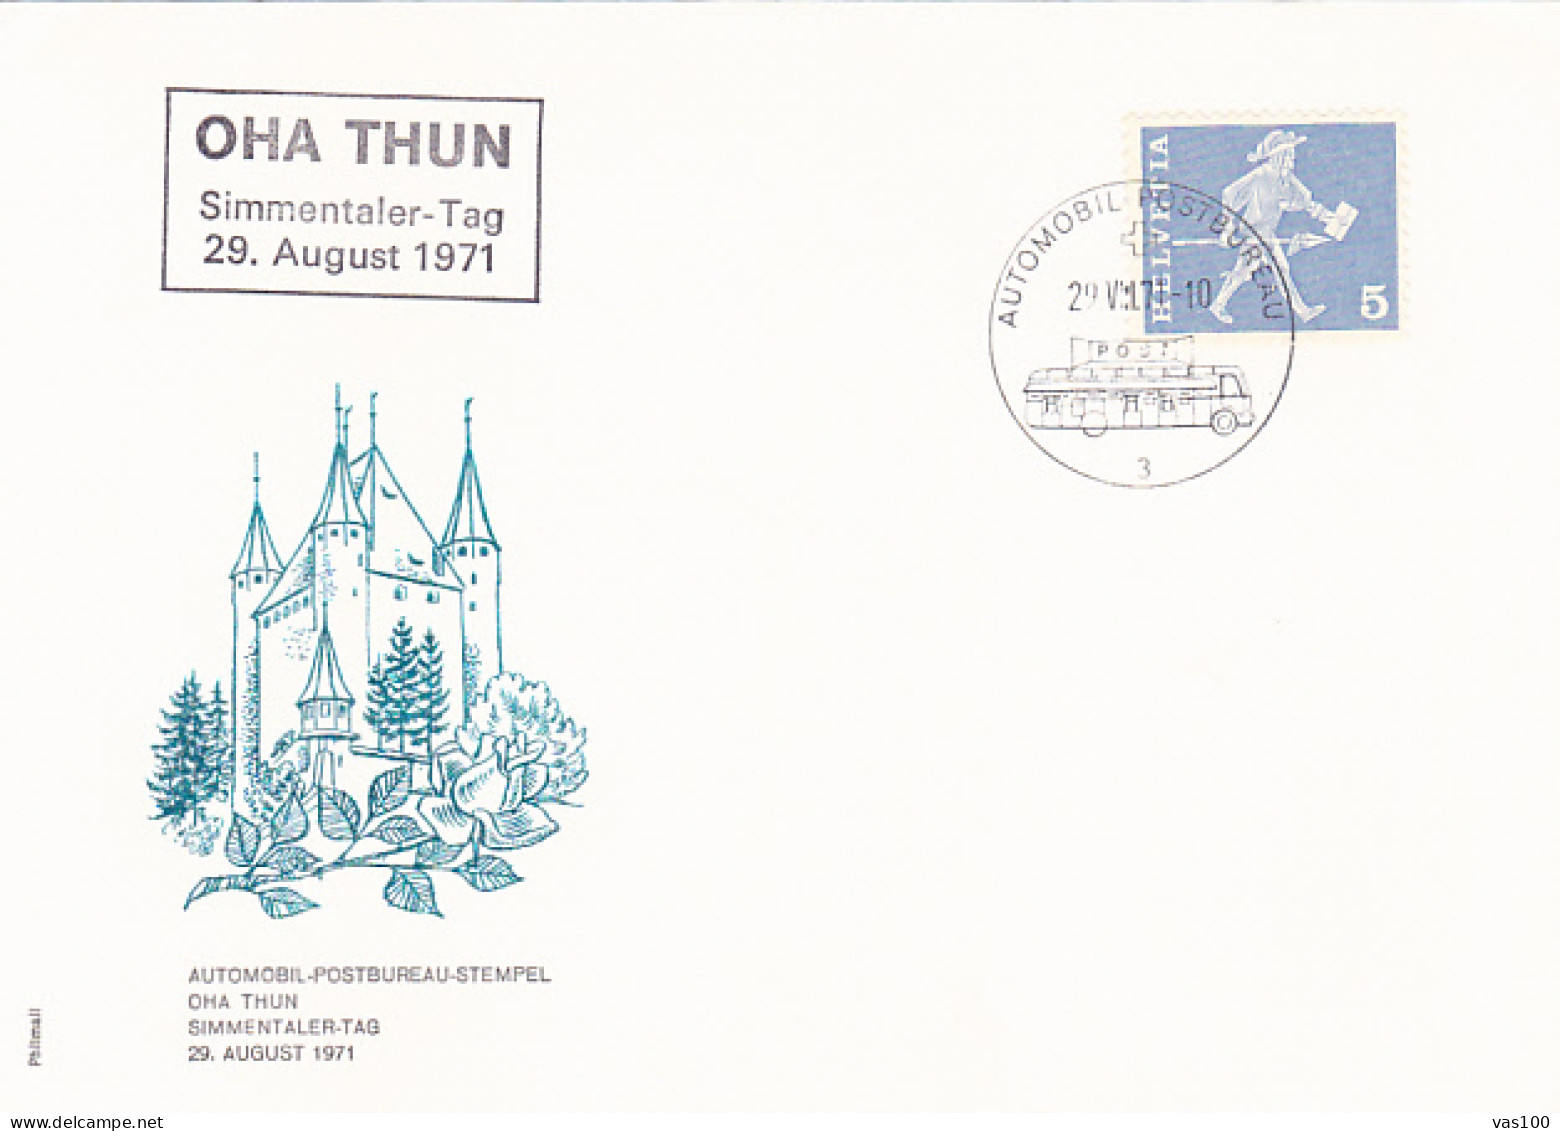 TRANSPORT, BUSS, MOBILE POST OFFICE POSTAMRK ON THUN EXHIBITION SPECIAL COVER, 1971, SWITZERLAND - Bus